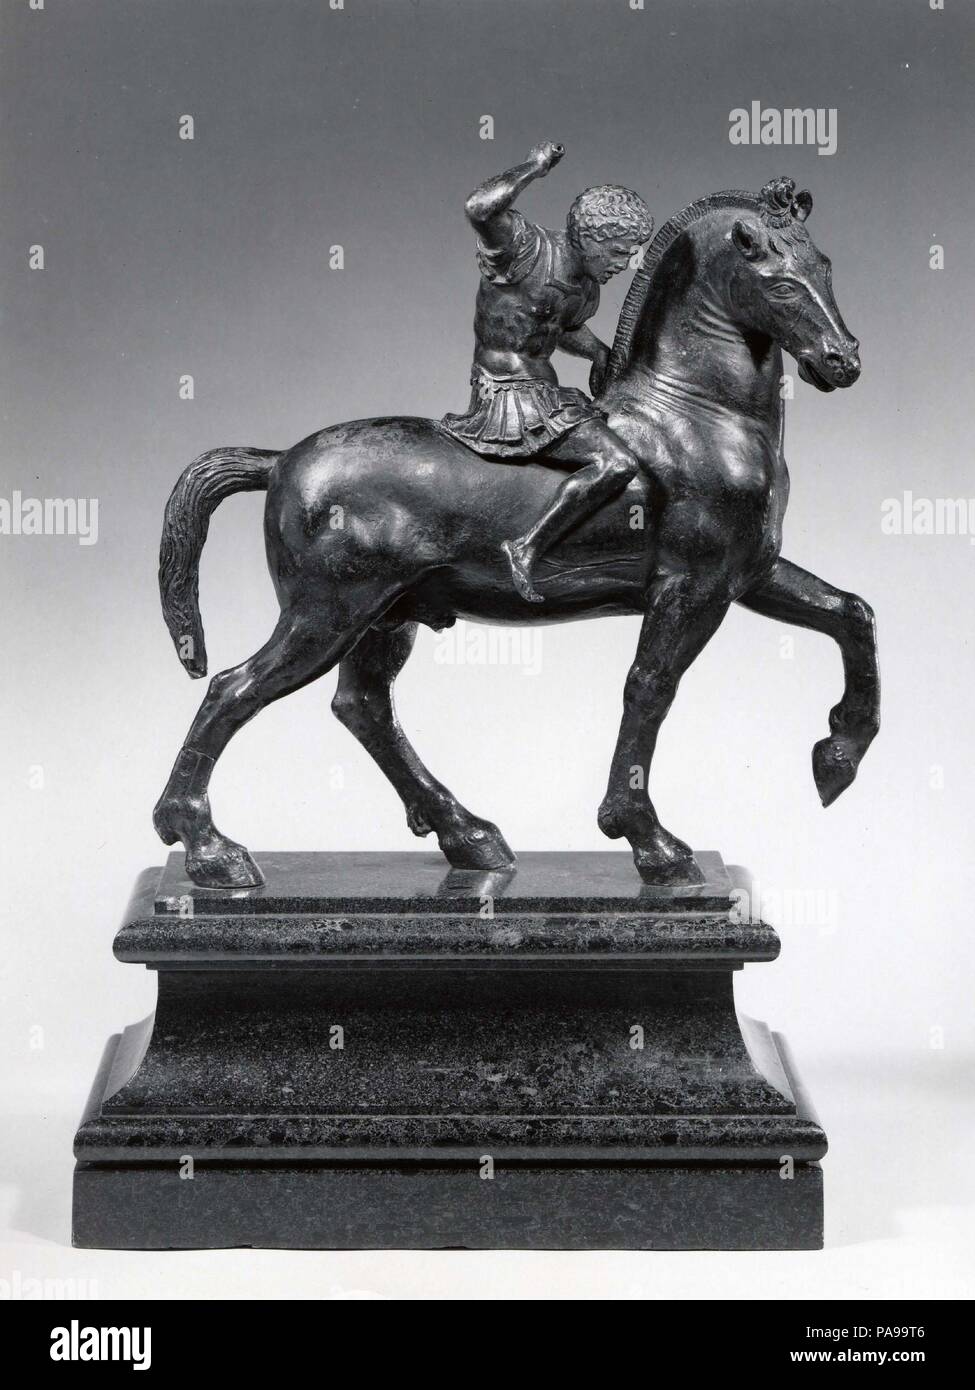 Warrior on Horseback. Artist: Attributed to Desiderio da Firenze (Italian, born Florence, active Padua, 1532-45). Dimensions: H. 25.8 cm (excluding the modern, green marble base).. Date: ca. 1540.  During the Renaissance, monumental bronze equestrian statues from Roman antiquity were highly admired for their technical virtuosity and as celebrations of triumphant ancient heroes. Several equestrian statues were created in emulation of Roman prototypes to honor contemporary rulers and military leaders. The small-scale warrior on horseback was a popular variation on the colossal equestrian statue. Stock Photo